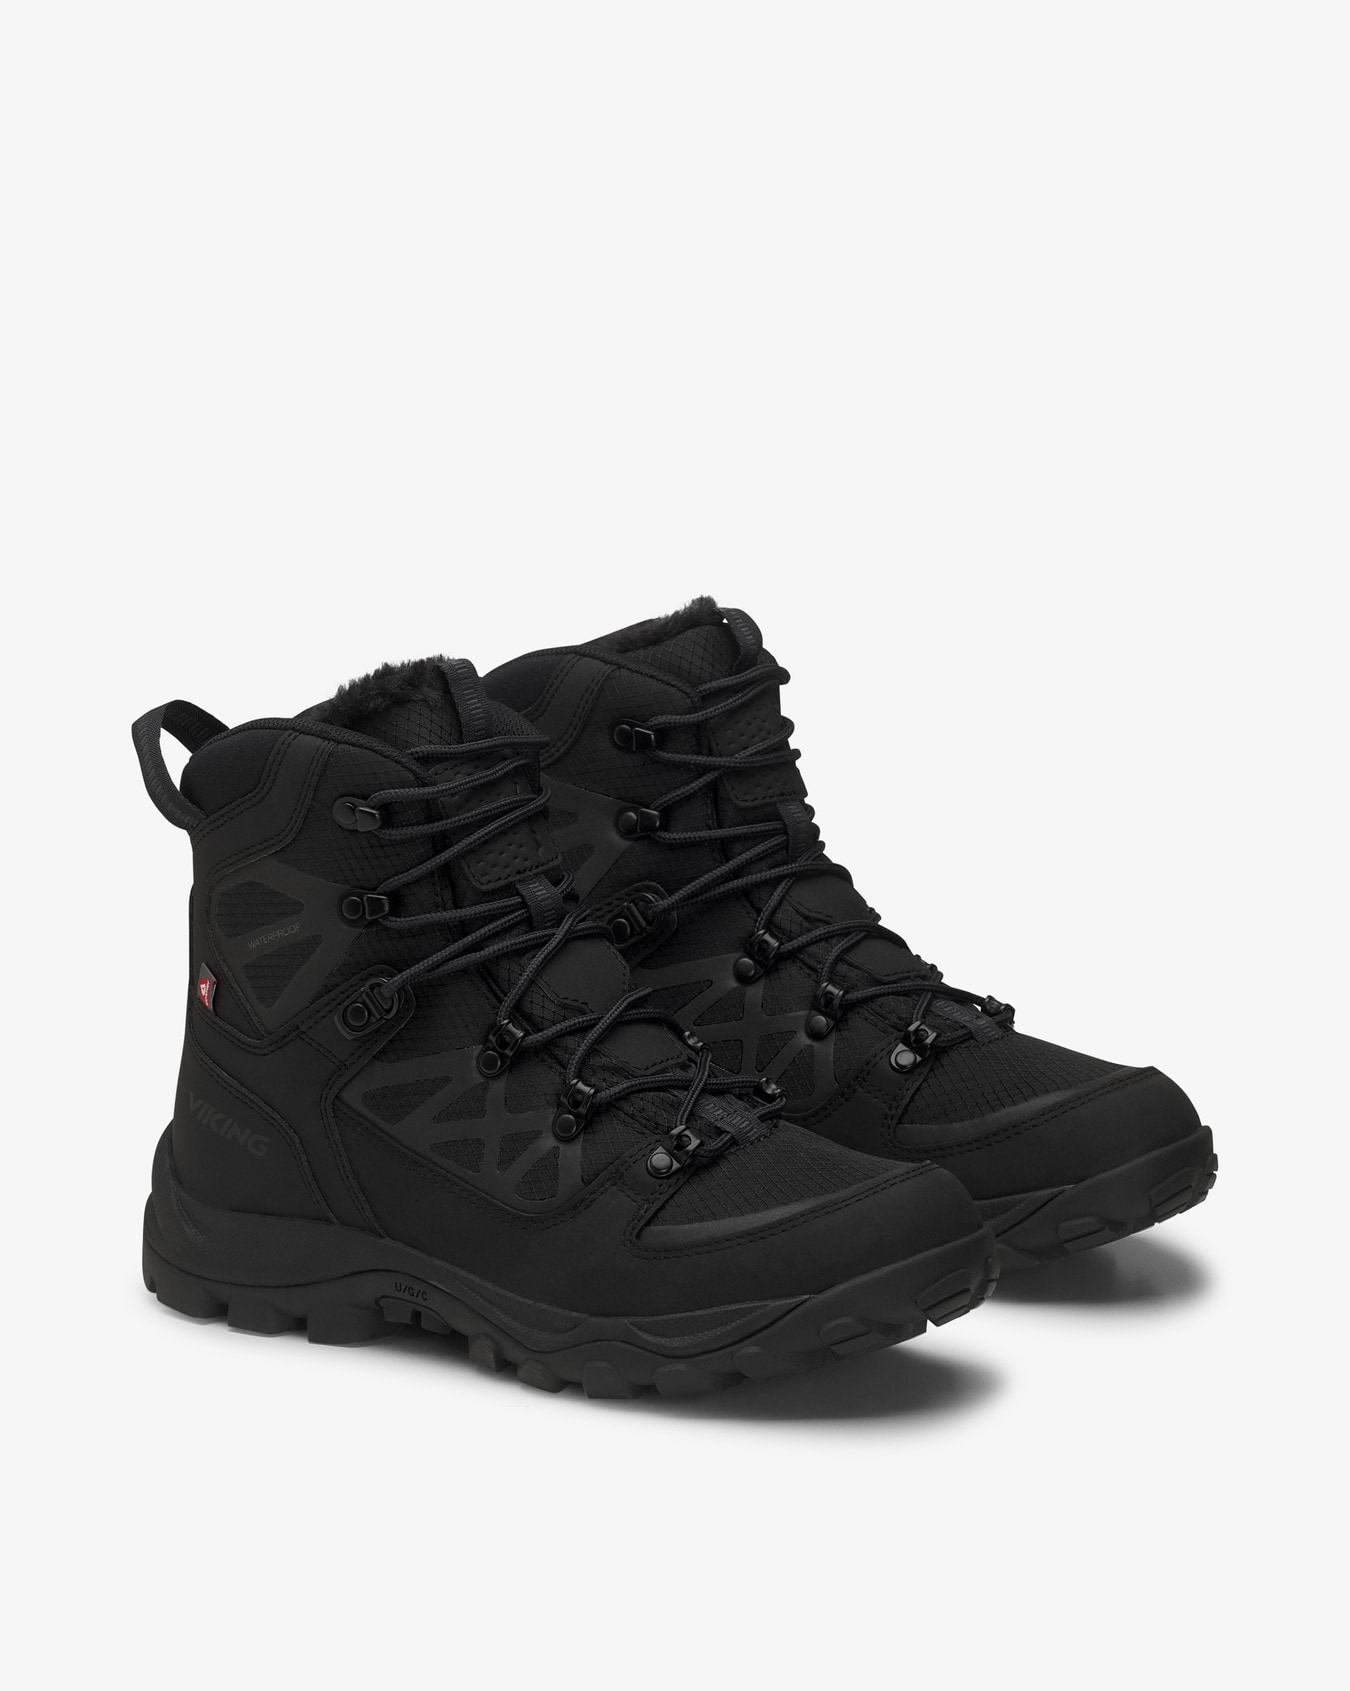 Constrictor High WP M Black Hiking